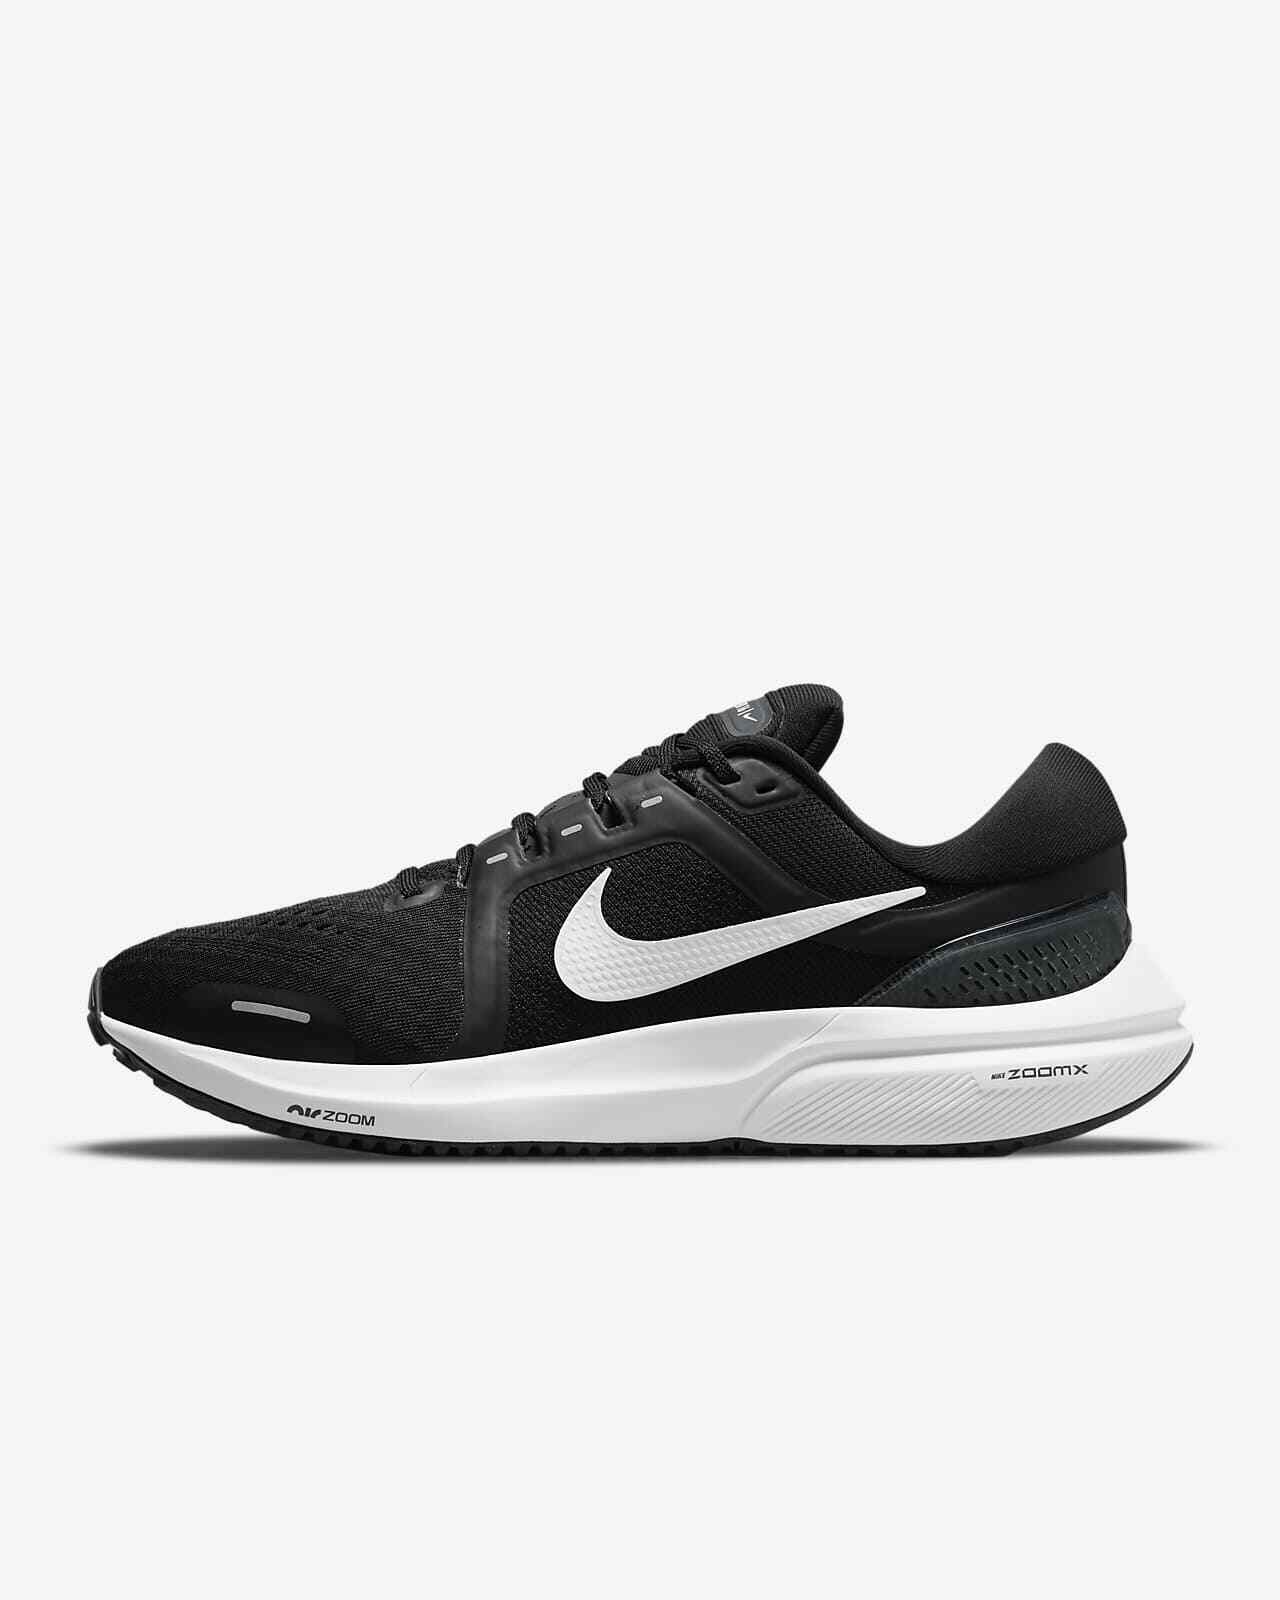 New Nike Air Zoom Vomero 16 Black White Running Shoes sz 10 4E X Wide $150